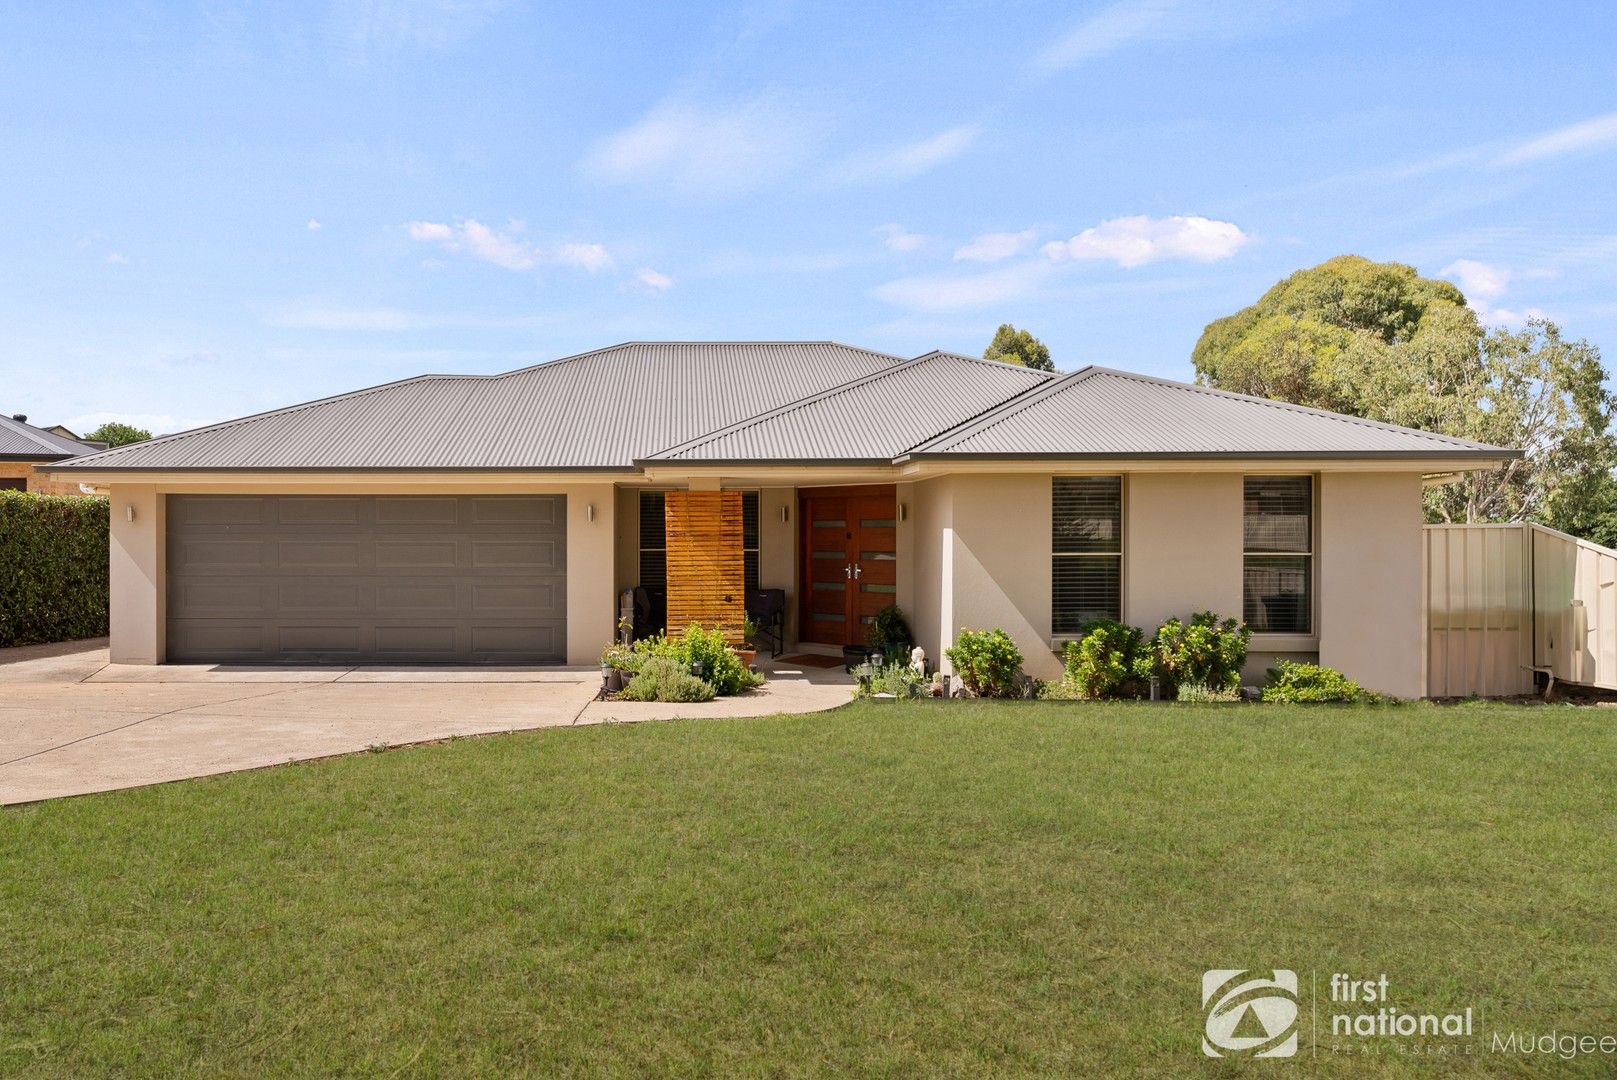 4 bedrooms House in 8 Denton Close MUDGEE NSW, 2850